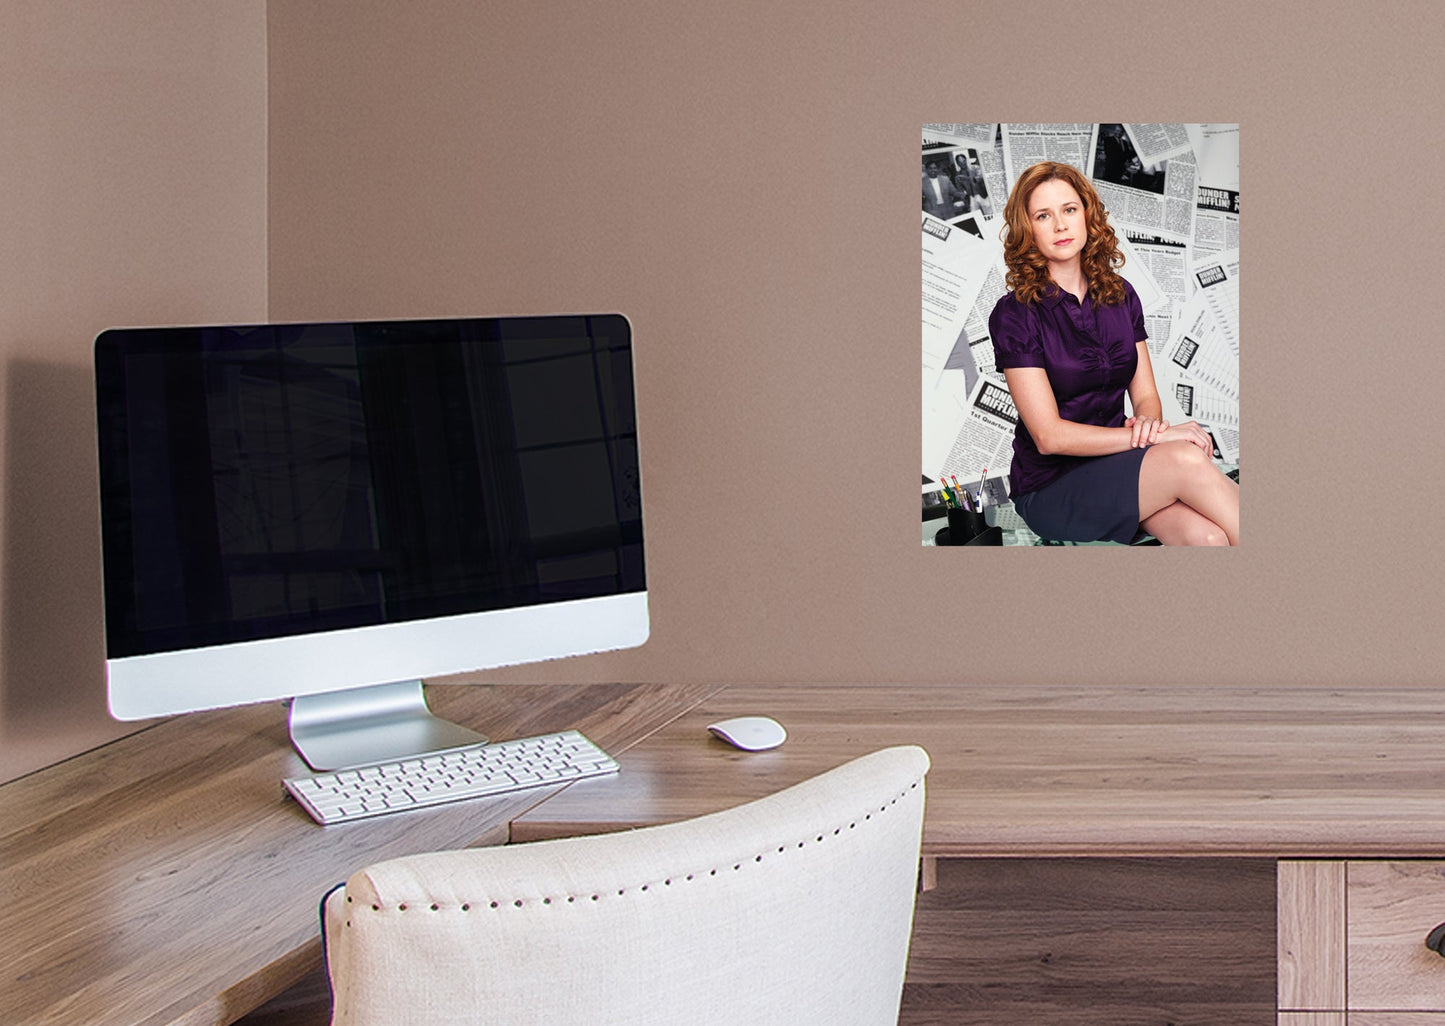 The Office: Pam Mural        - Officially Licensed NBC Universal Removable Wall   Adhesive Decal